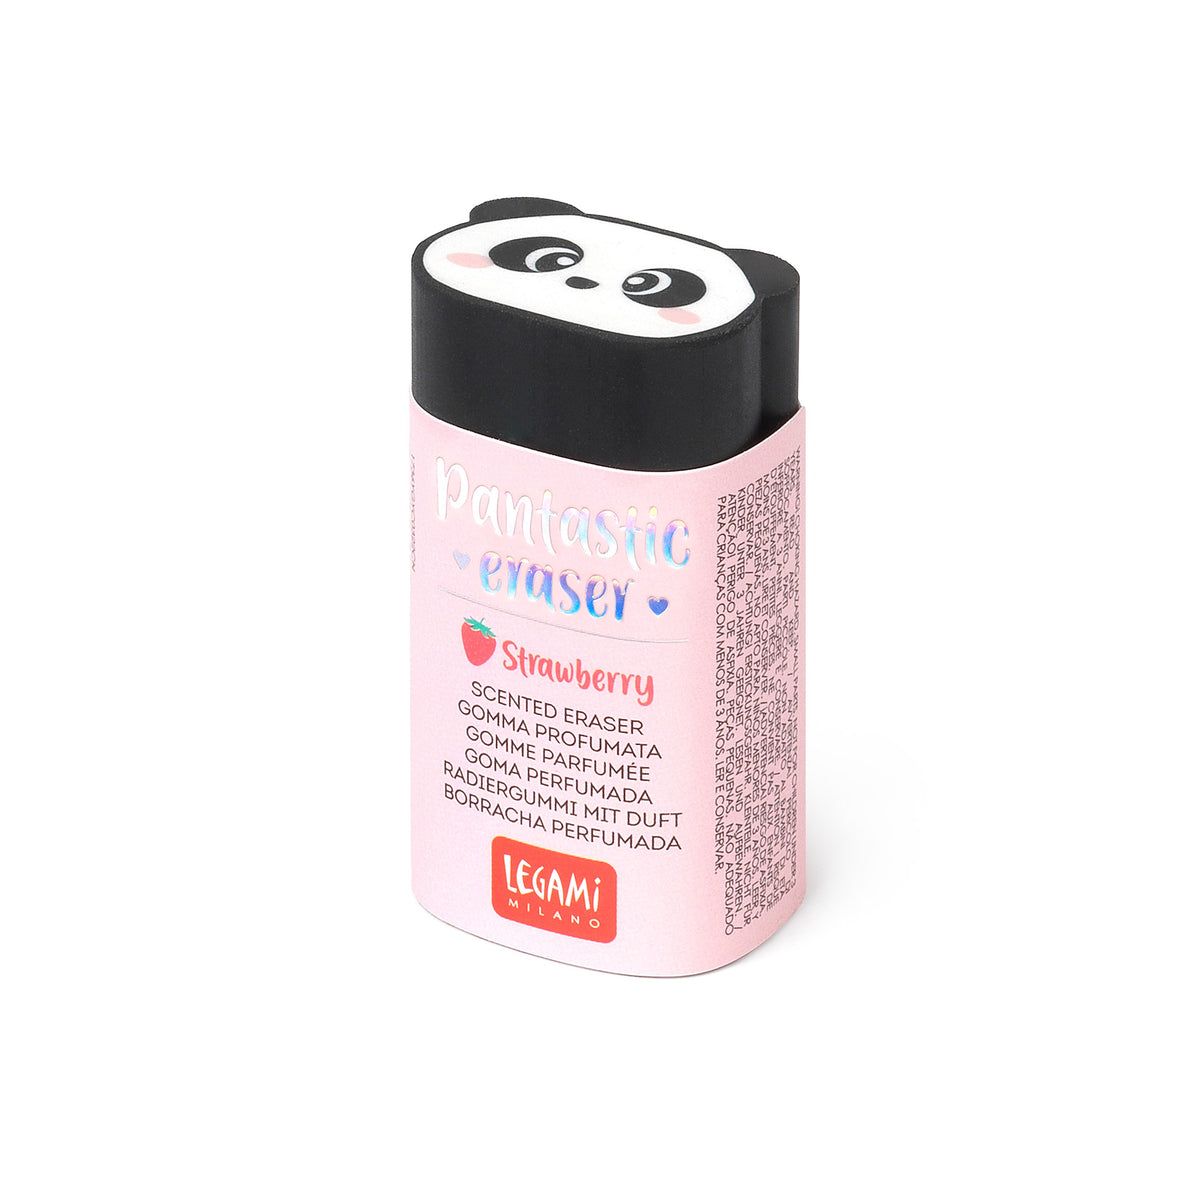 An eraser in the shape of a panda&#39;s head. The eraser is partially covered in a pink card retail packaging stating the product name and details including that it is scented with strawberry.